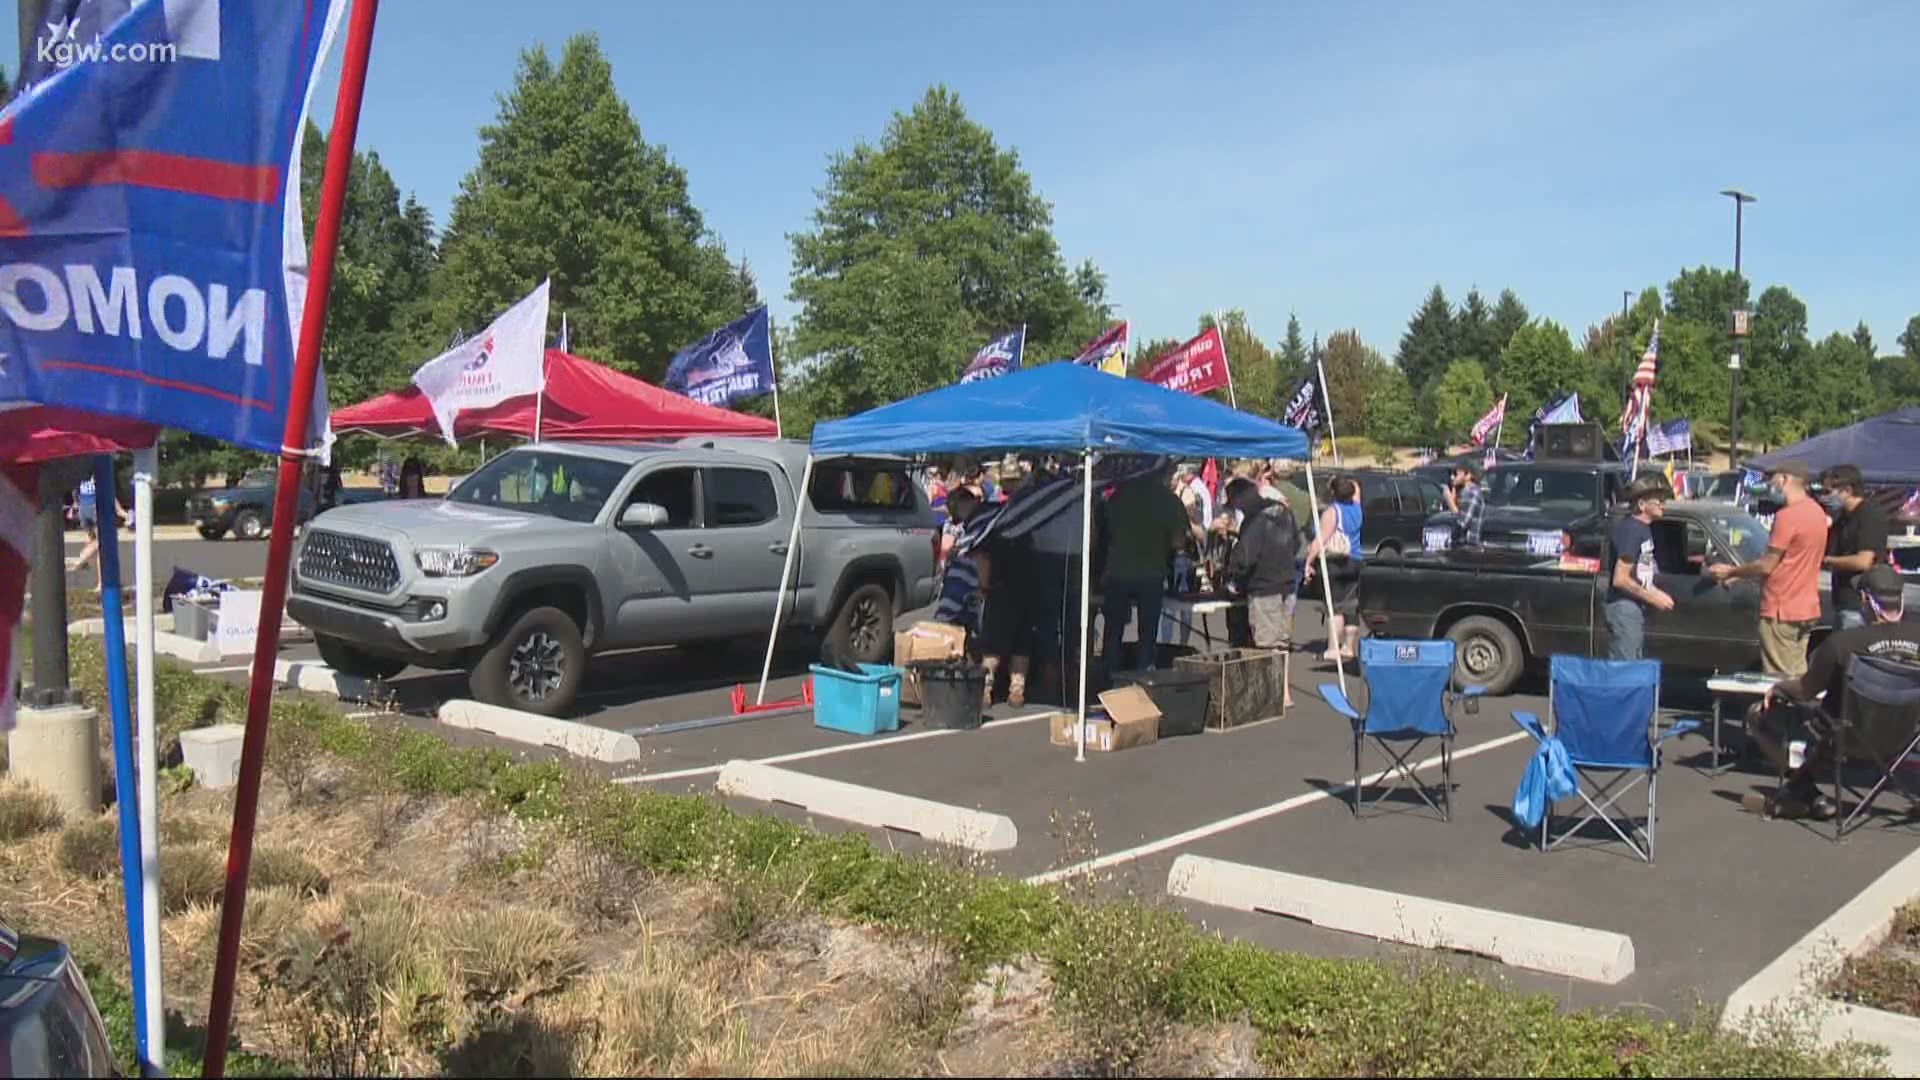 Hundreds of Trump supporters held a rally in Oregon City before moving in a caravan south to Salem Monday afternoon.